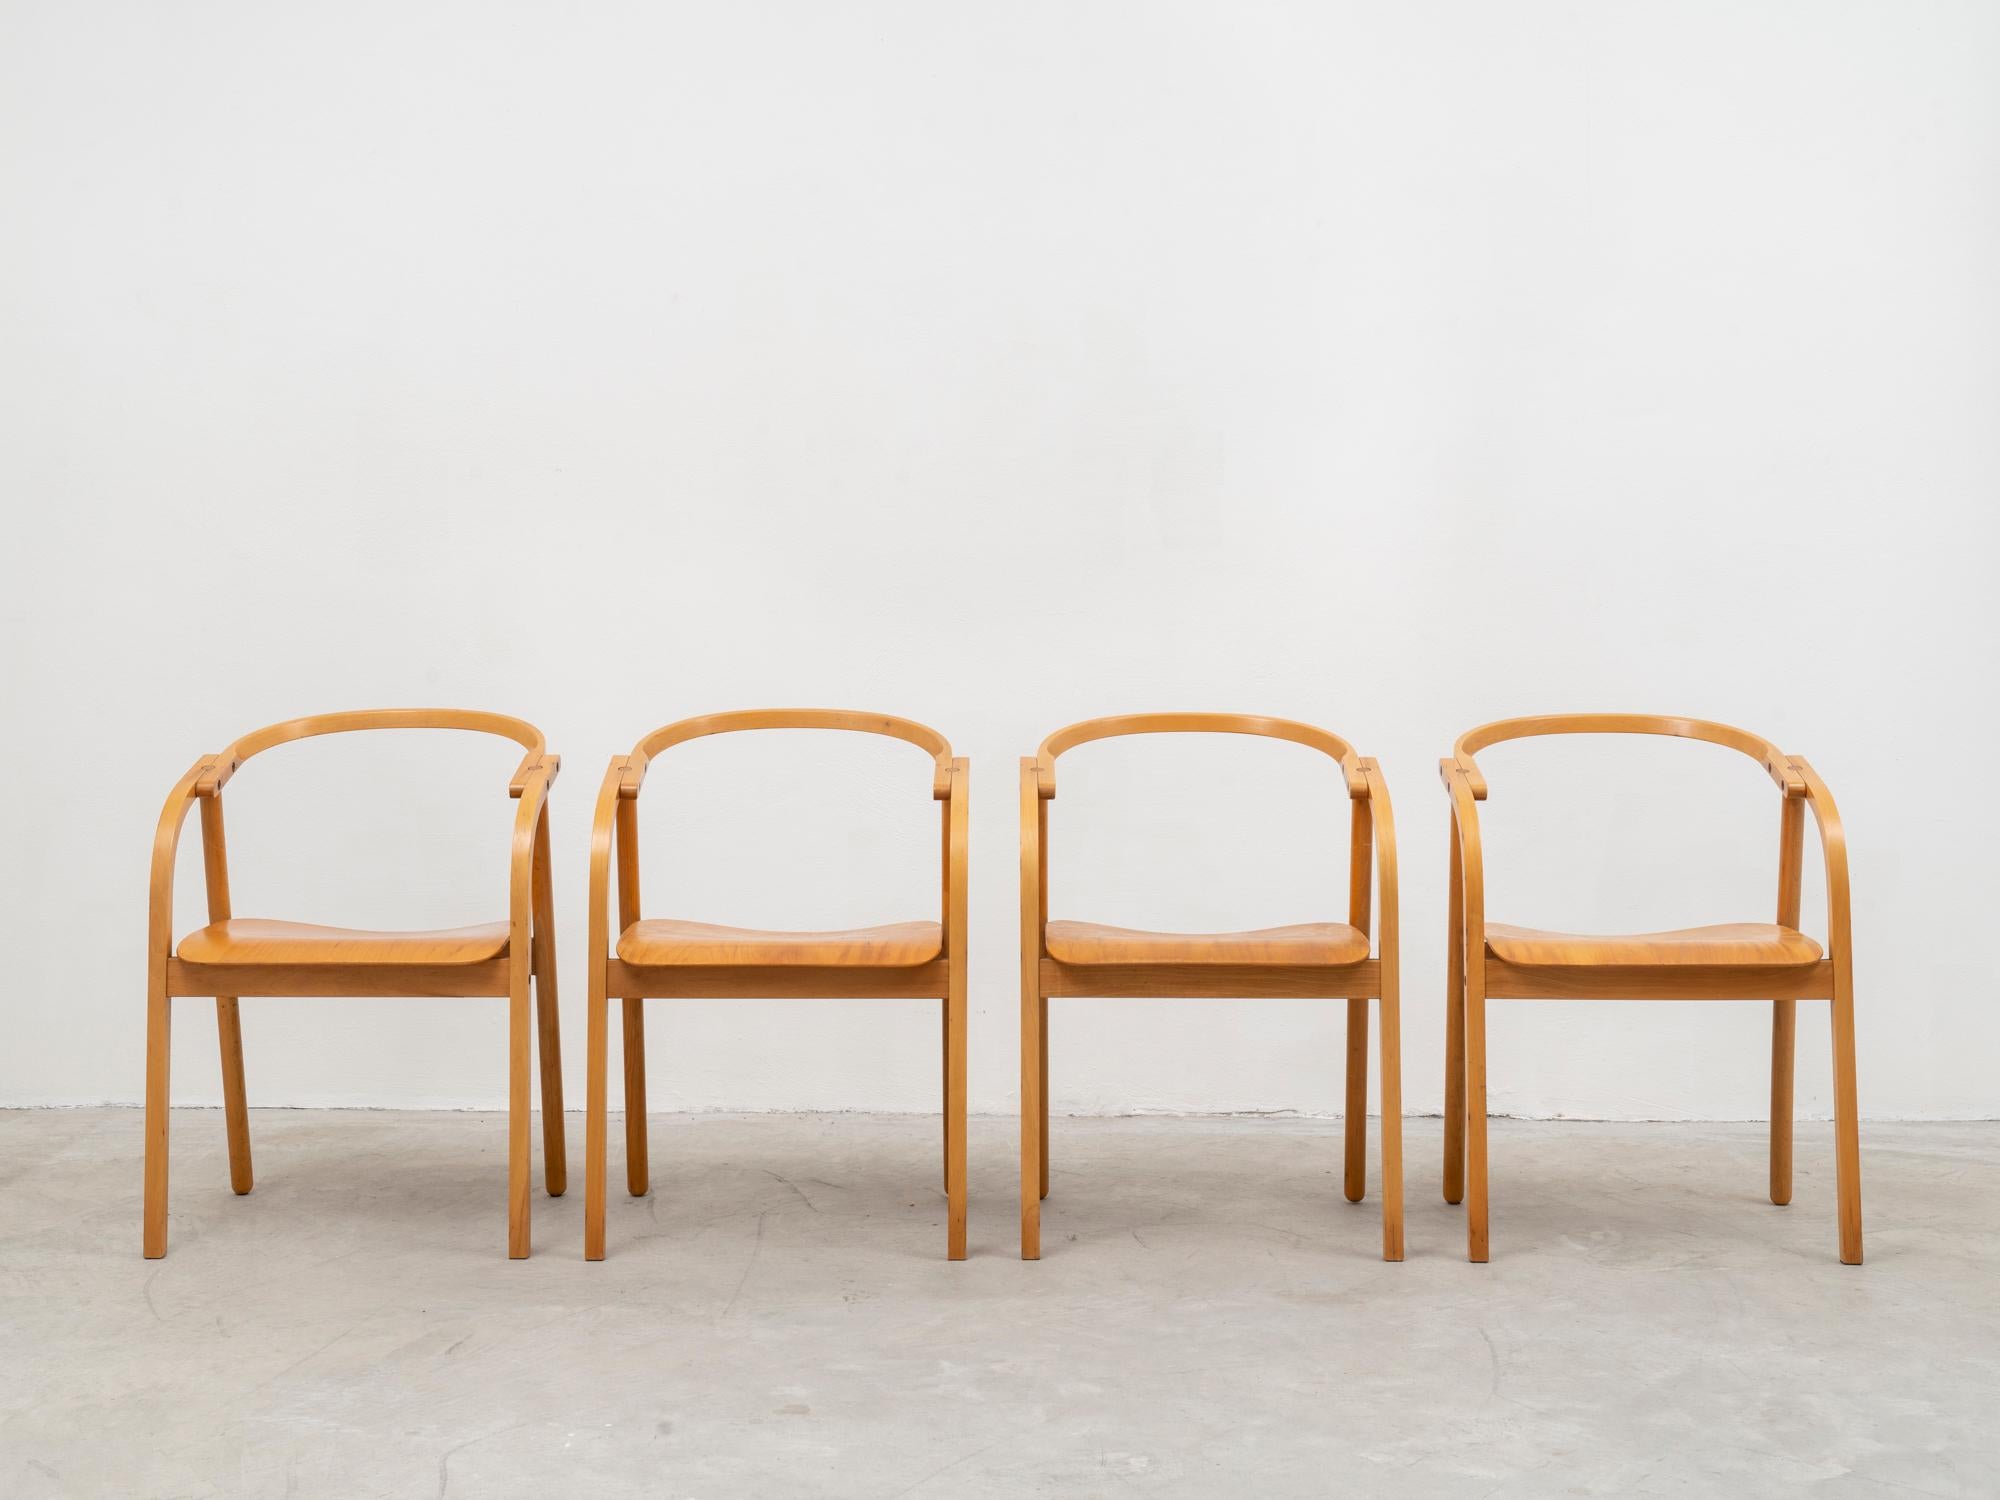 Very rare set of chairs by the designers Werther Toffoloni and Piero Palange, manufactured by Ibis. This model was shortlisted for Compasso d'Oro competition in 1981. They are made of solid bent steamed beech, except from the seat that is made of